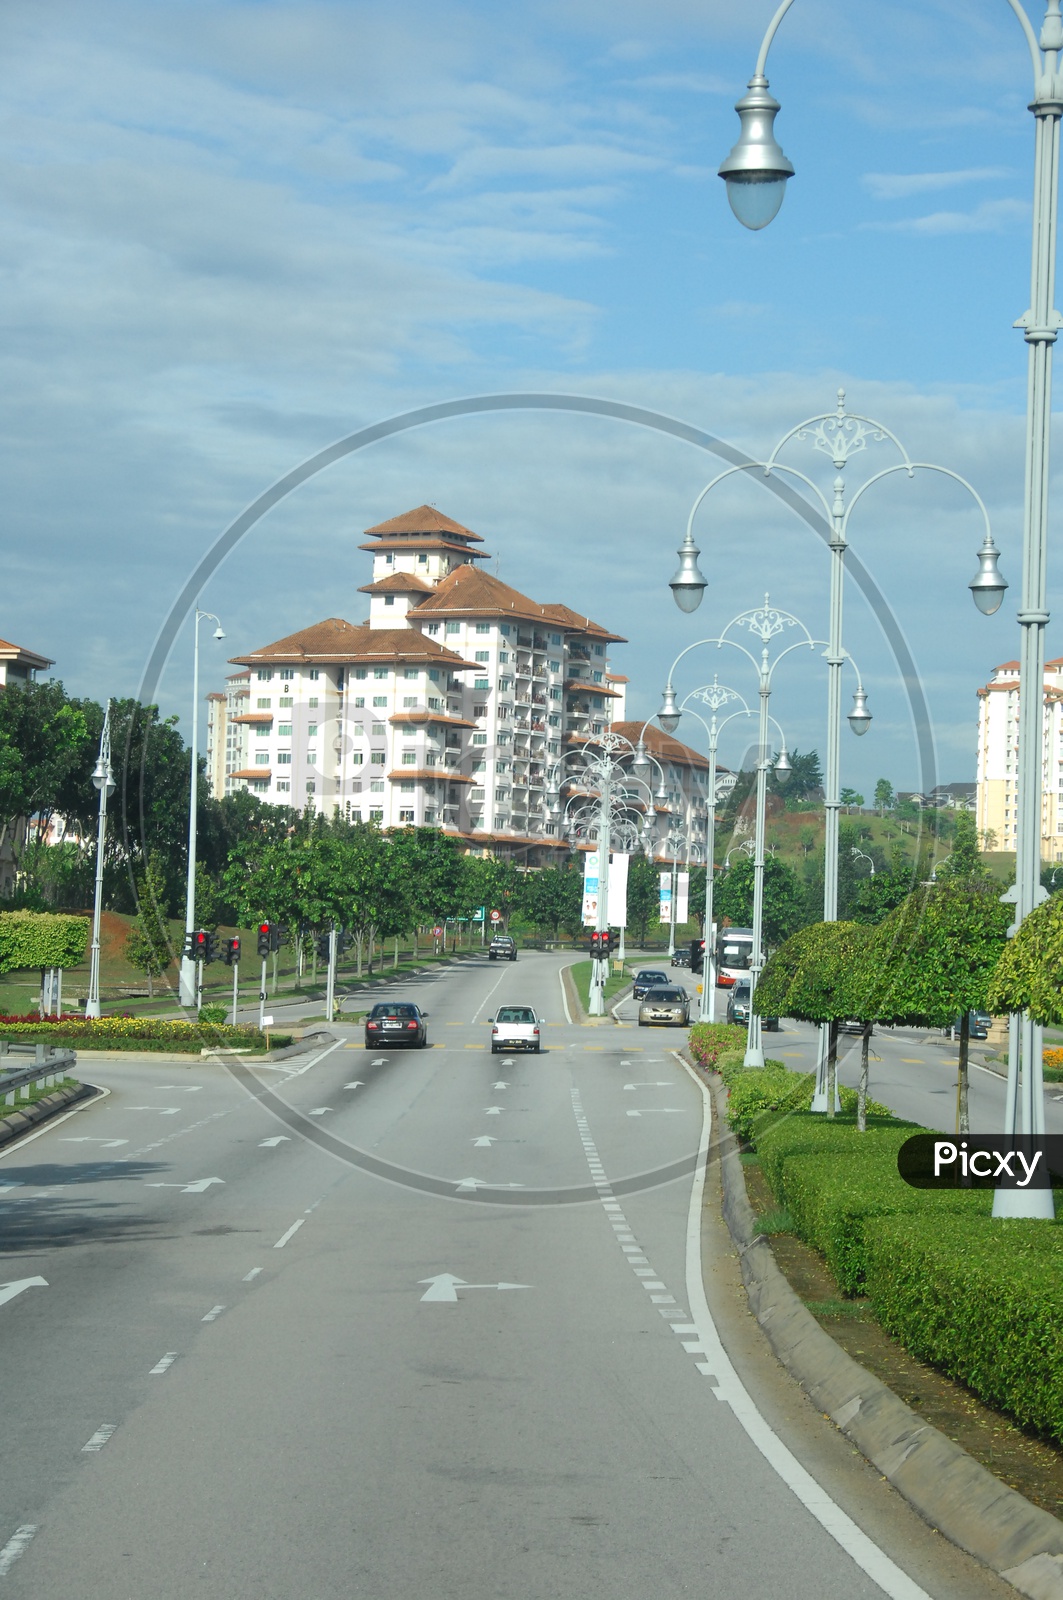 View of street lights and commercial buildings along the road